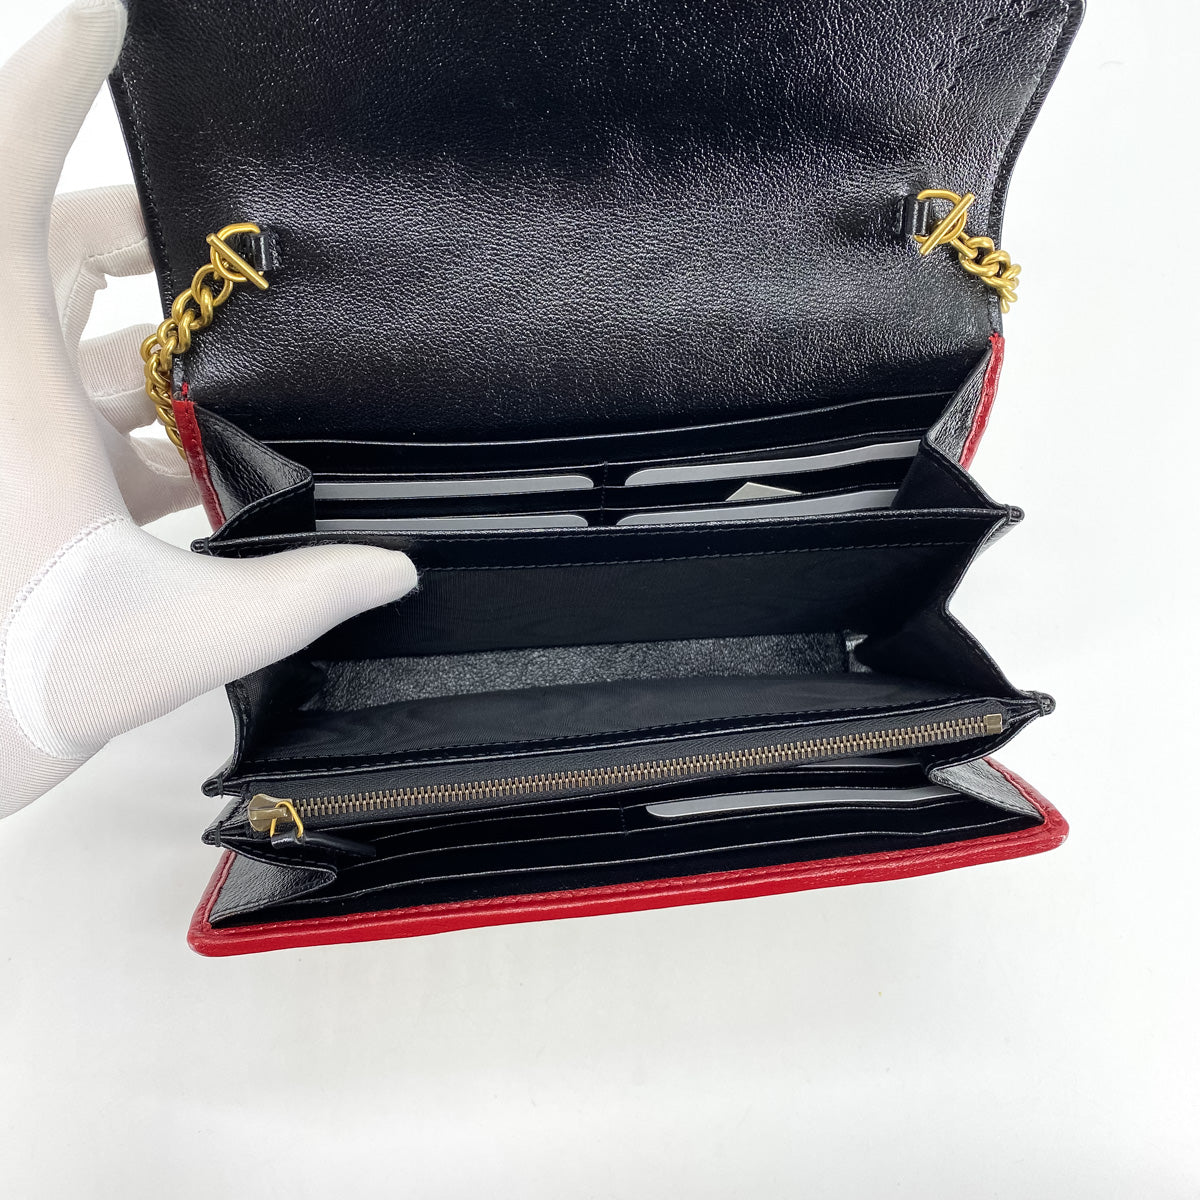 Gucci Marmont WOC Wallet On Chain Black/Red - THE PURSE AFFAIR